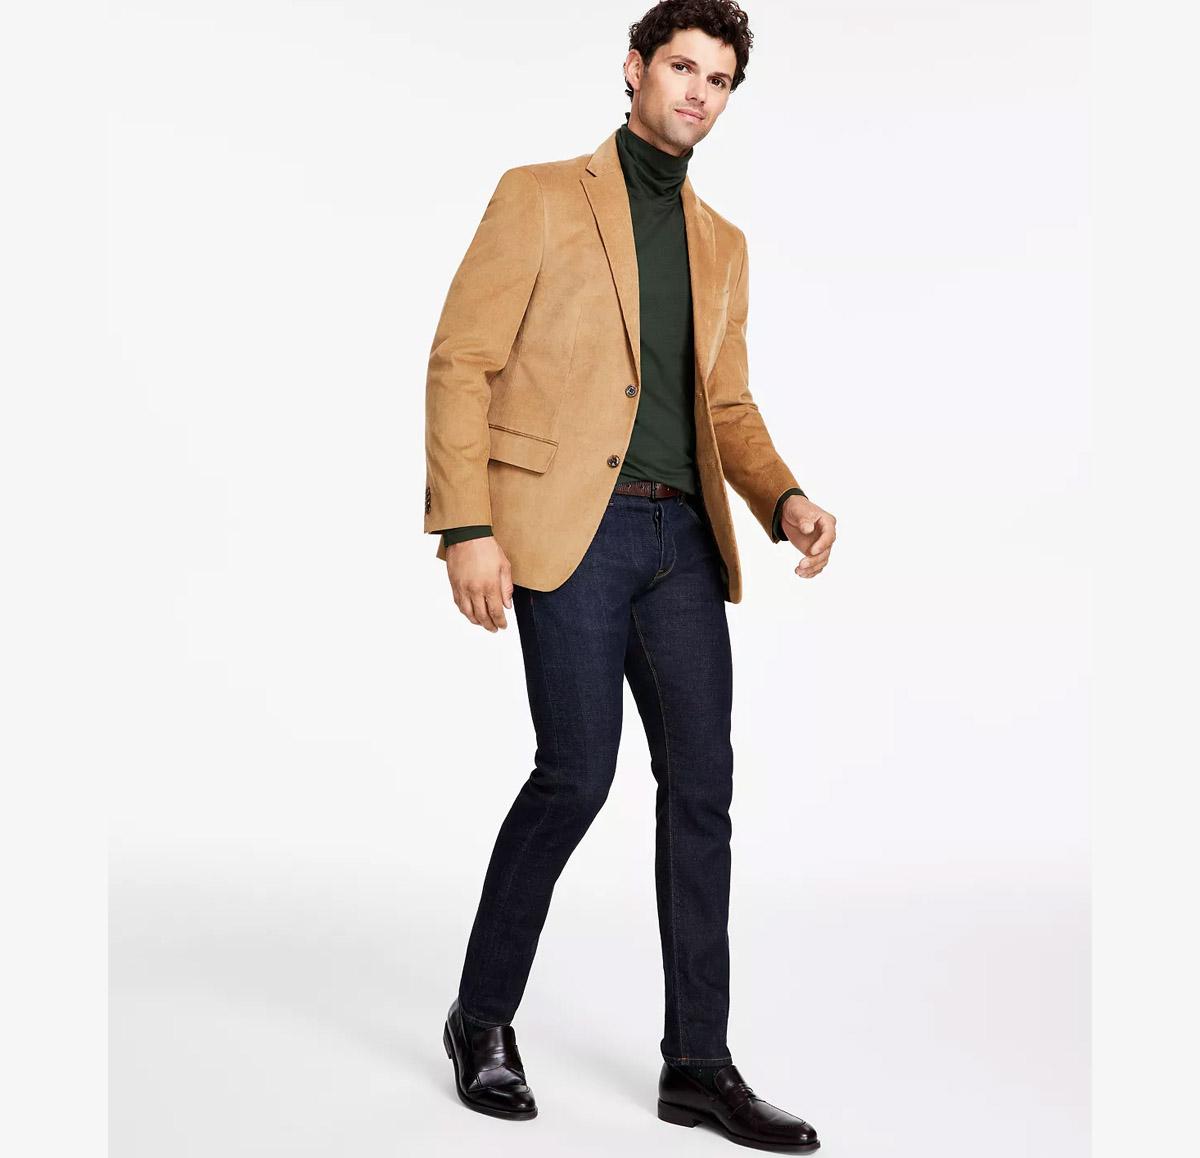 Tommy Hilfiger Modern-Fit Corduroy Sport Jacket for $38.24 Shipped